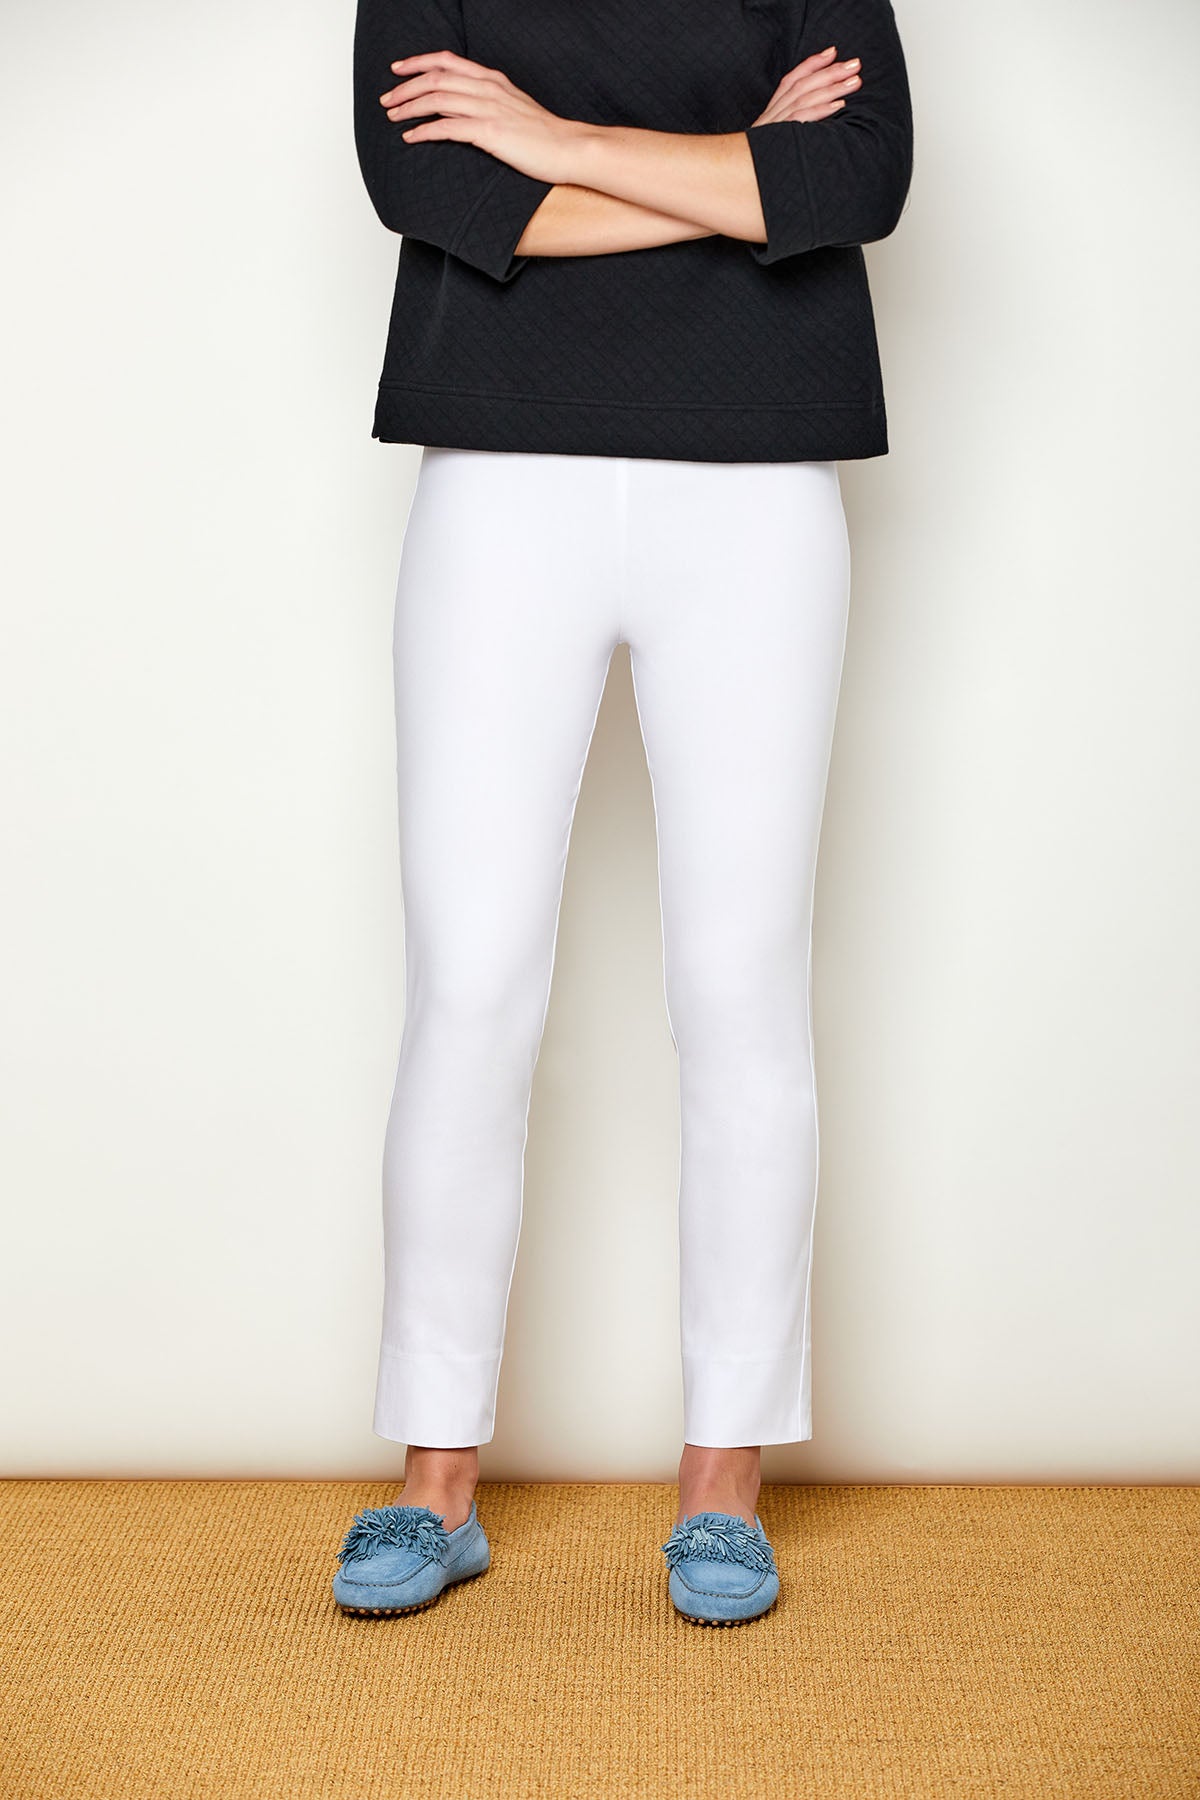 The best-selling Sara Campbell Sheri Pants in white